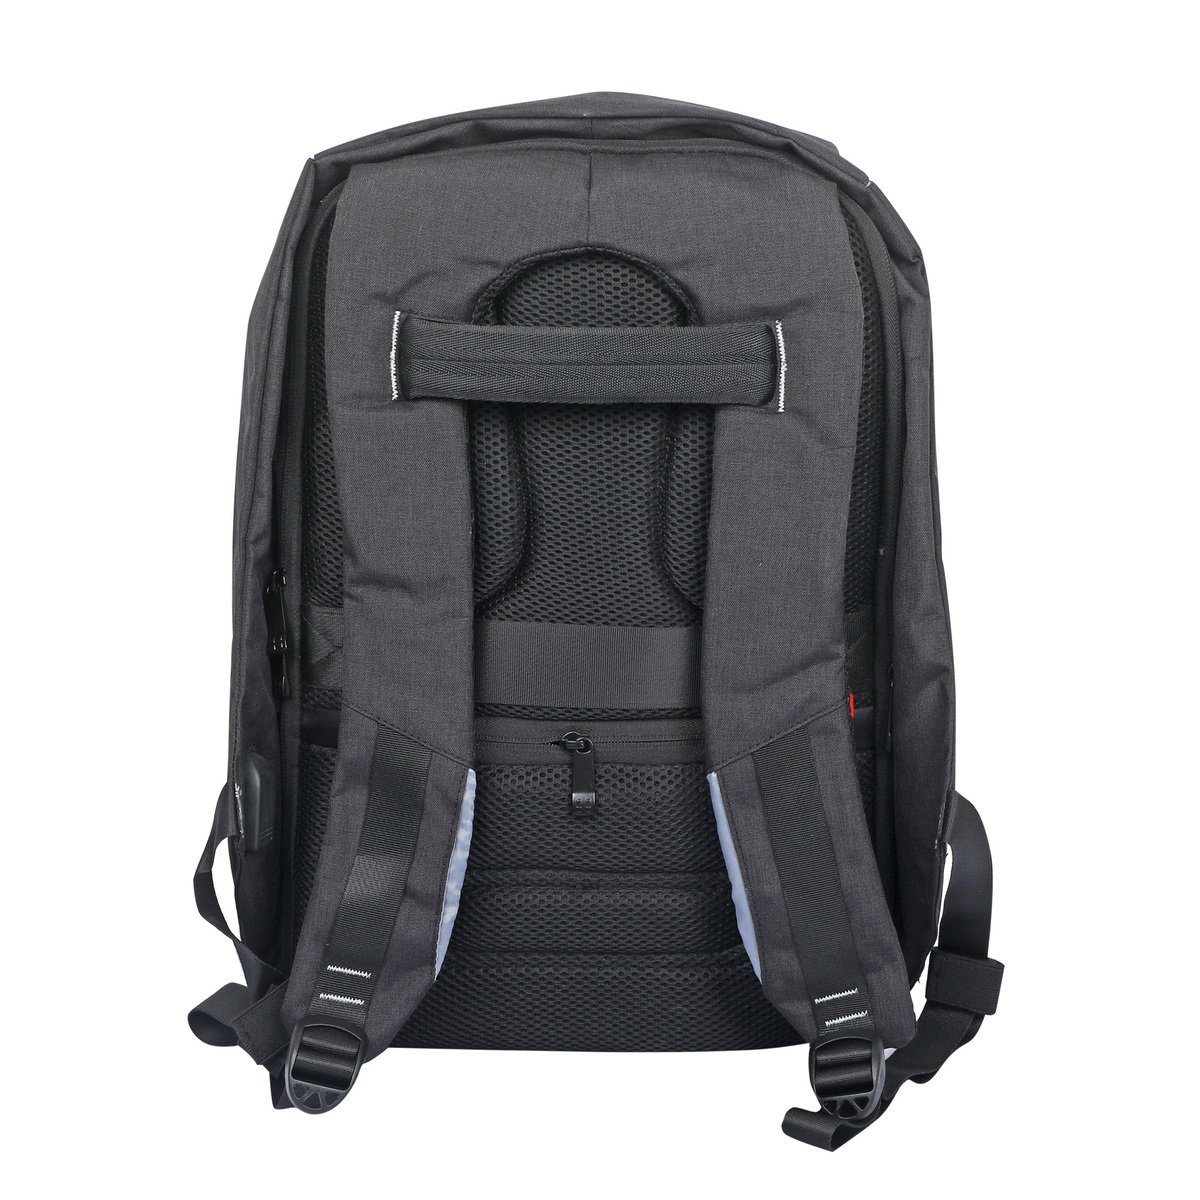 Wagon-R Anti Theft Back Pack DH24 20inches Assorted